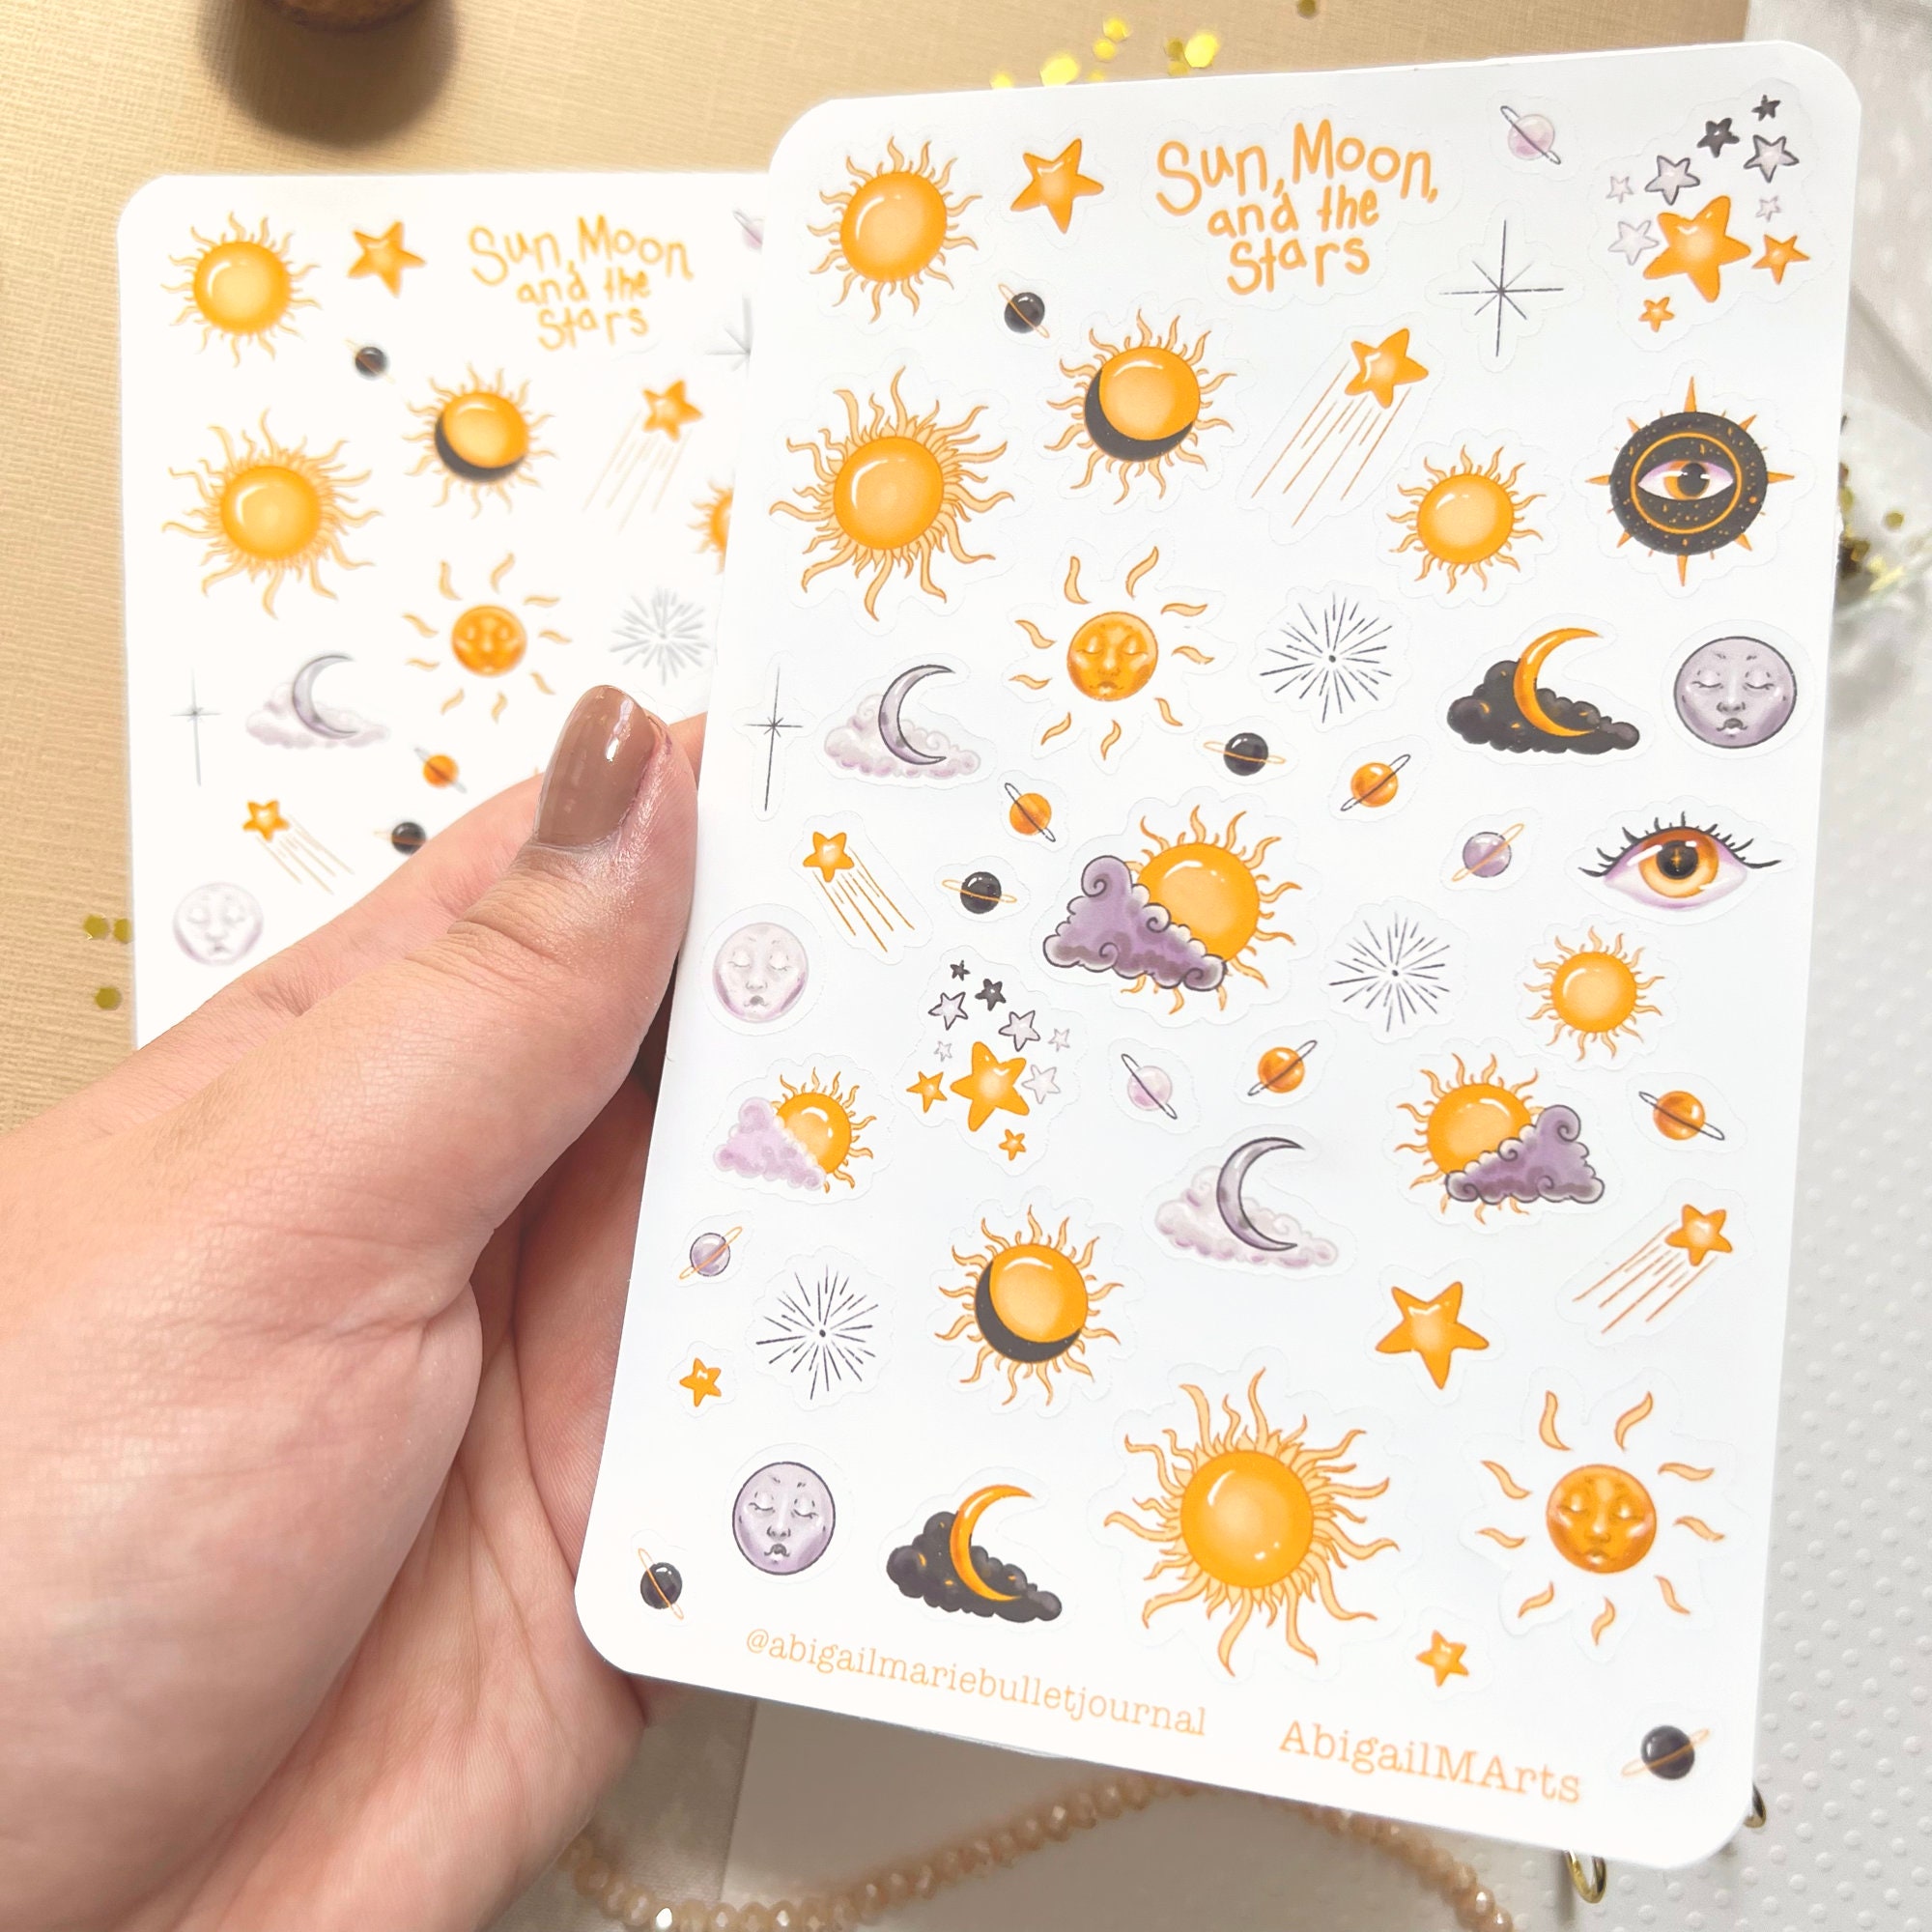 Sun Moon and Stars Sticker Sheet, Set of Small Metallic Gold Vinyl Decals,  Celestial Theme Stickers for Envelopes, Journals and Place Cards 